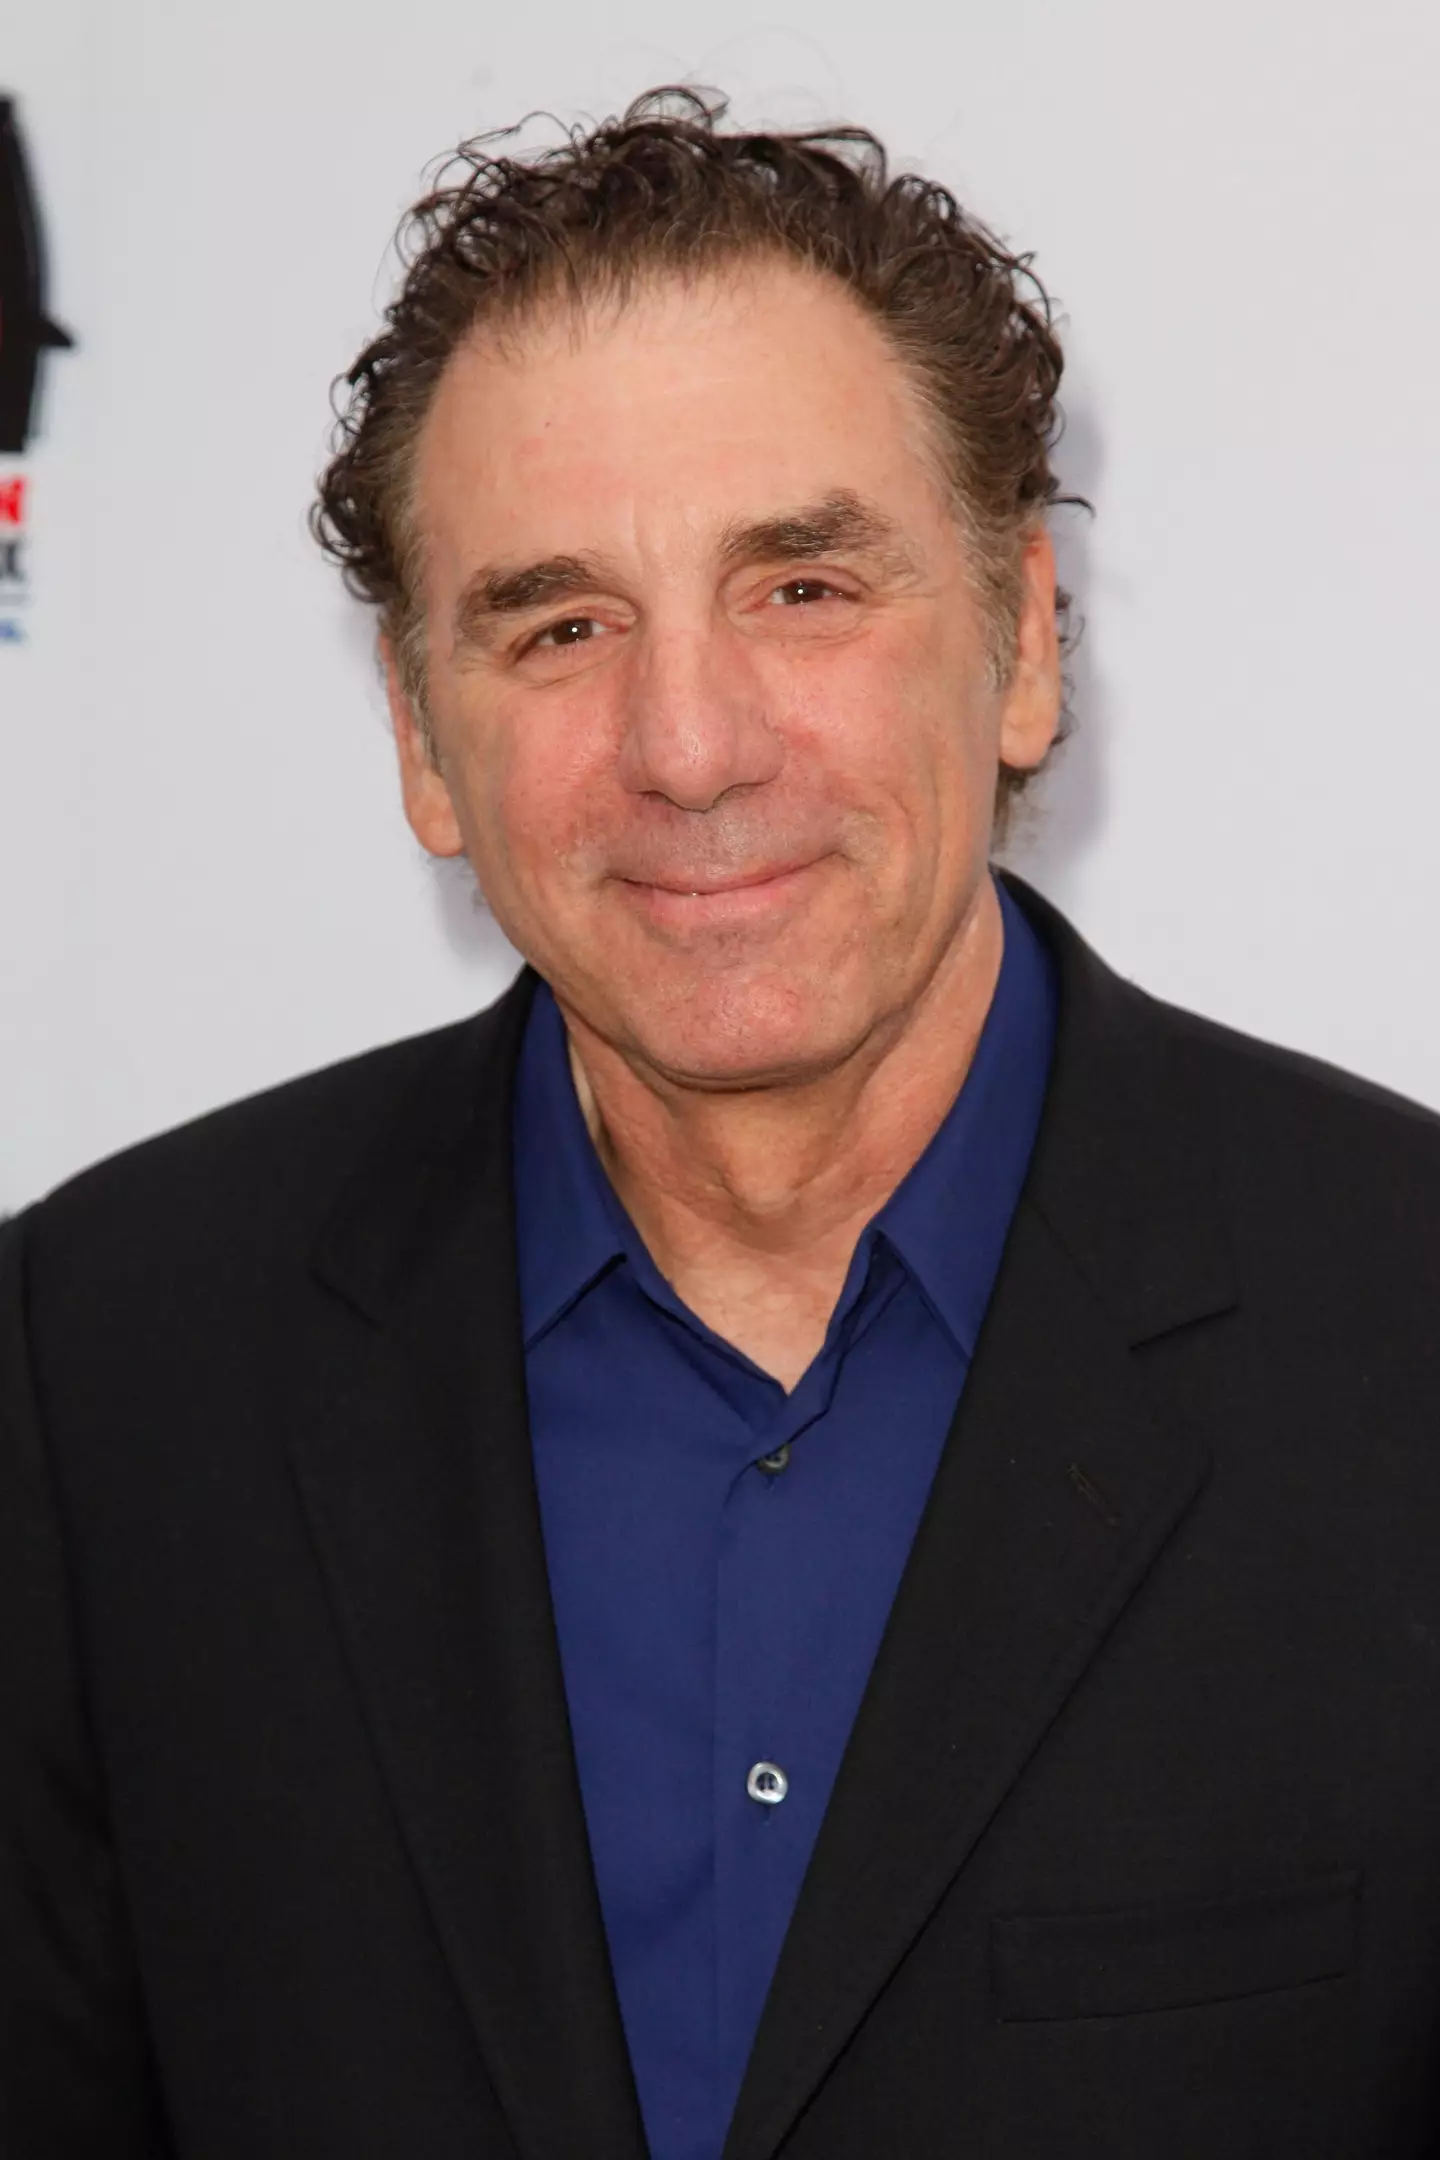 Michael Richards opened up about his mom. (Imeh Akpanudosen/Getty Images)